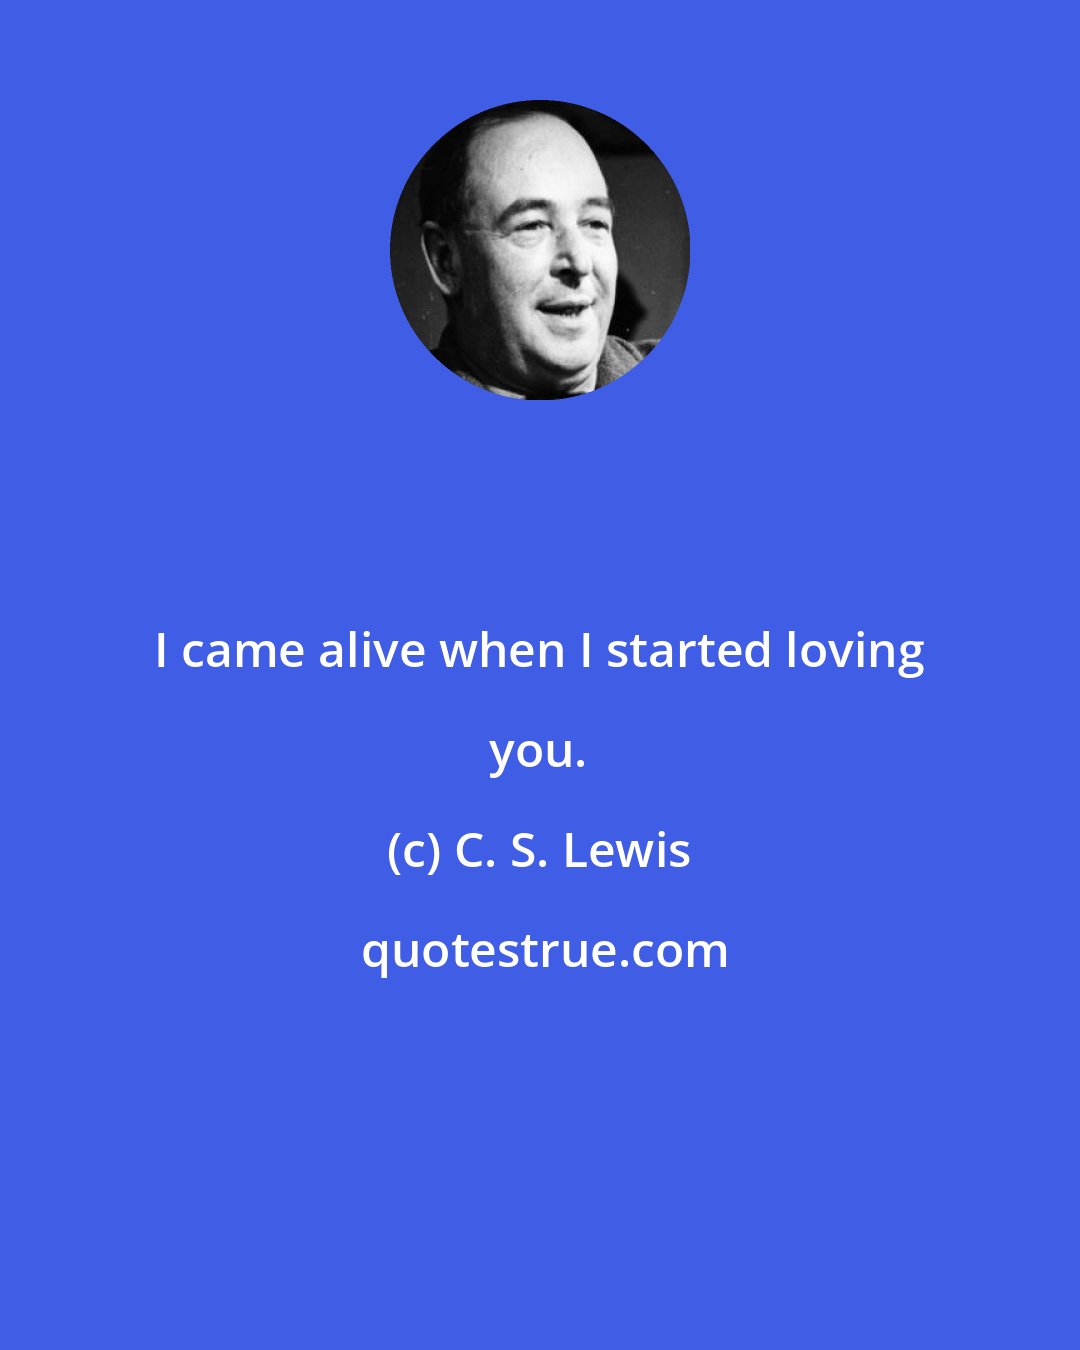 C. S. Lewis: I came alive when I started loving you.